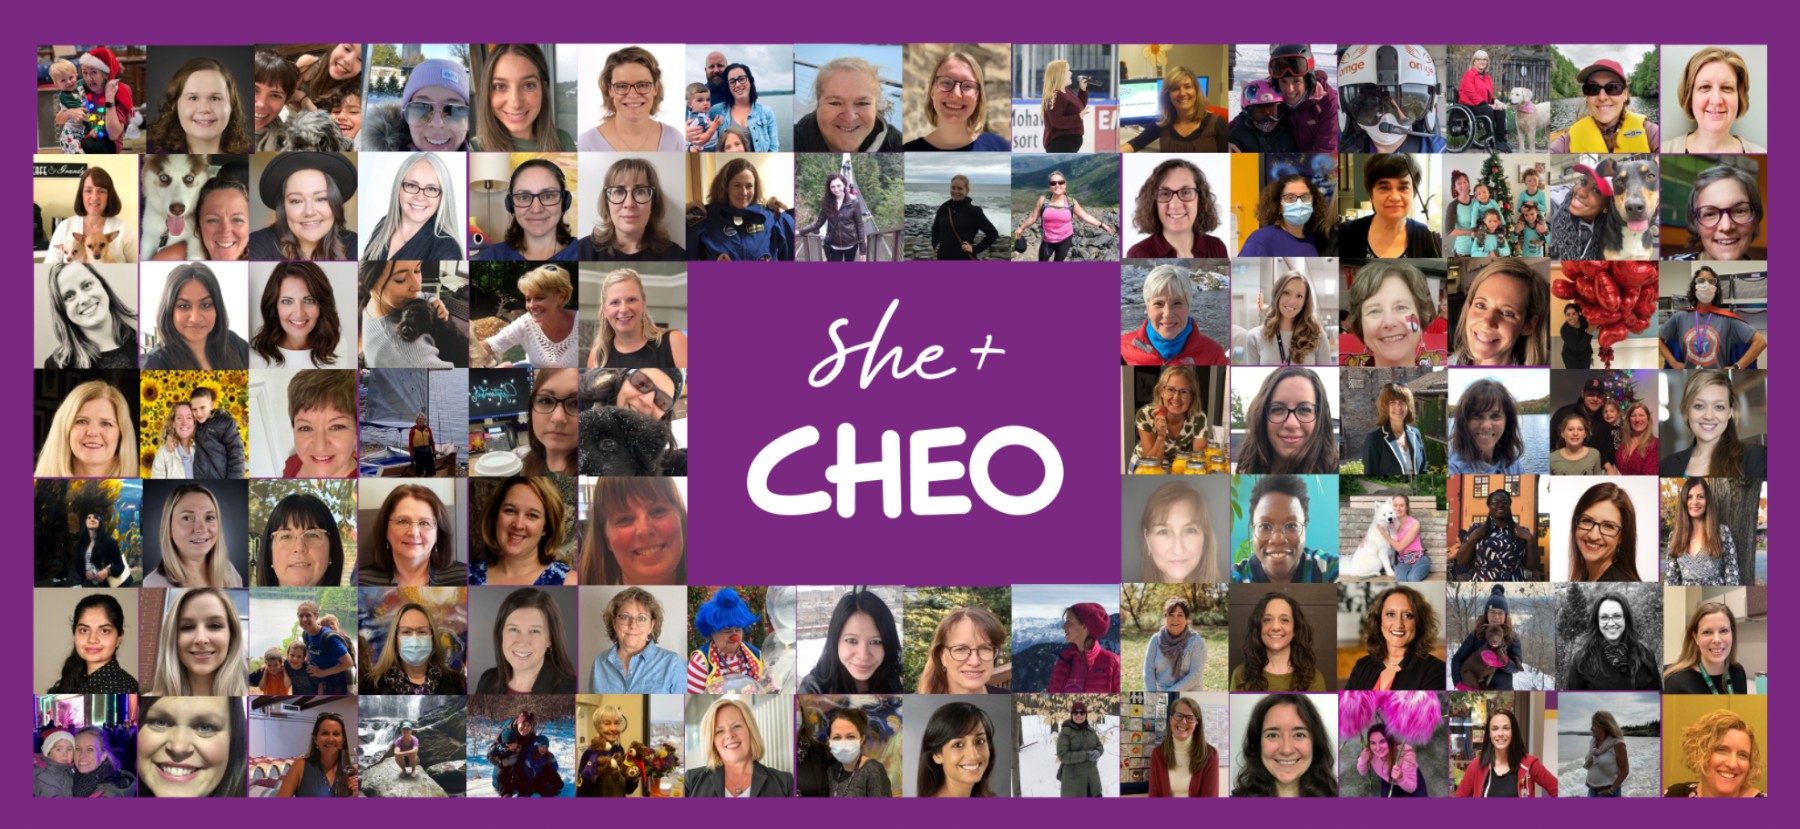 A rectangular collage of photos of women of CHEO, on a purple background. In the centre are the words "she + CHEO".